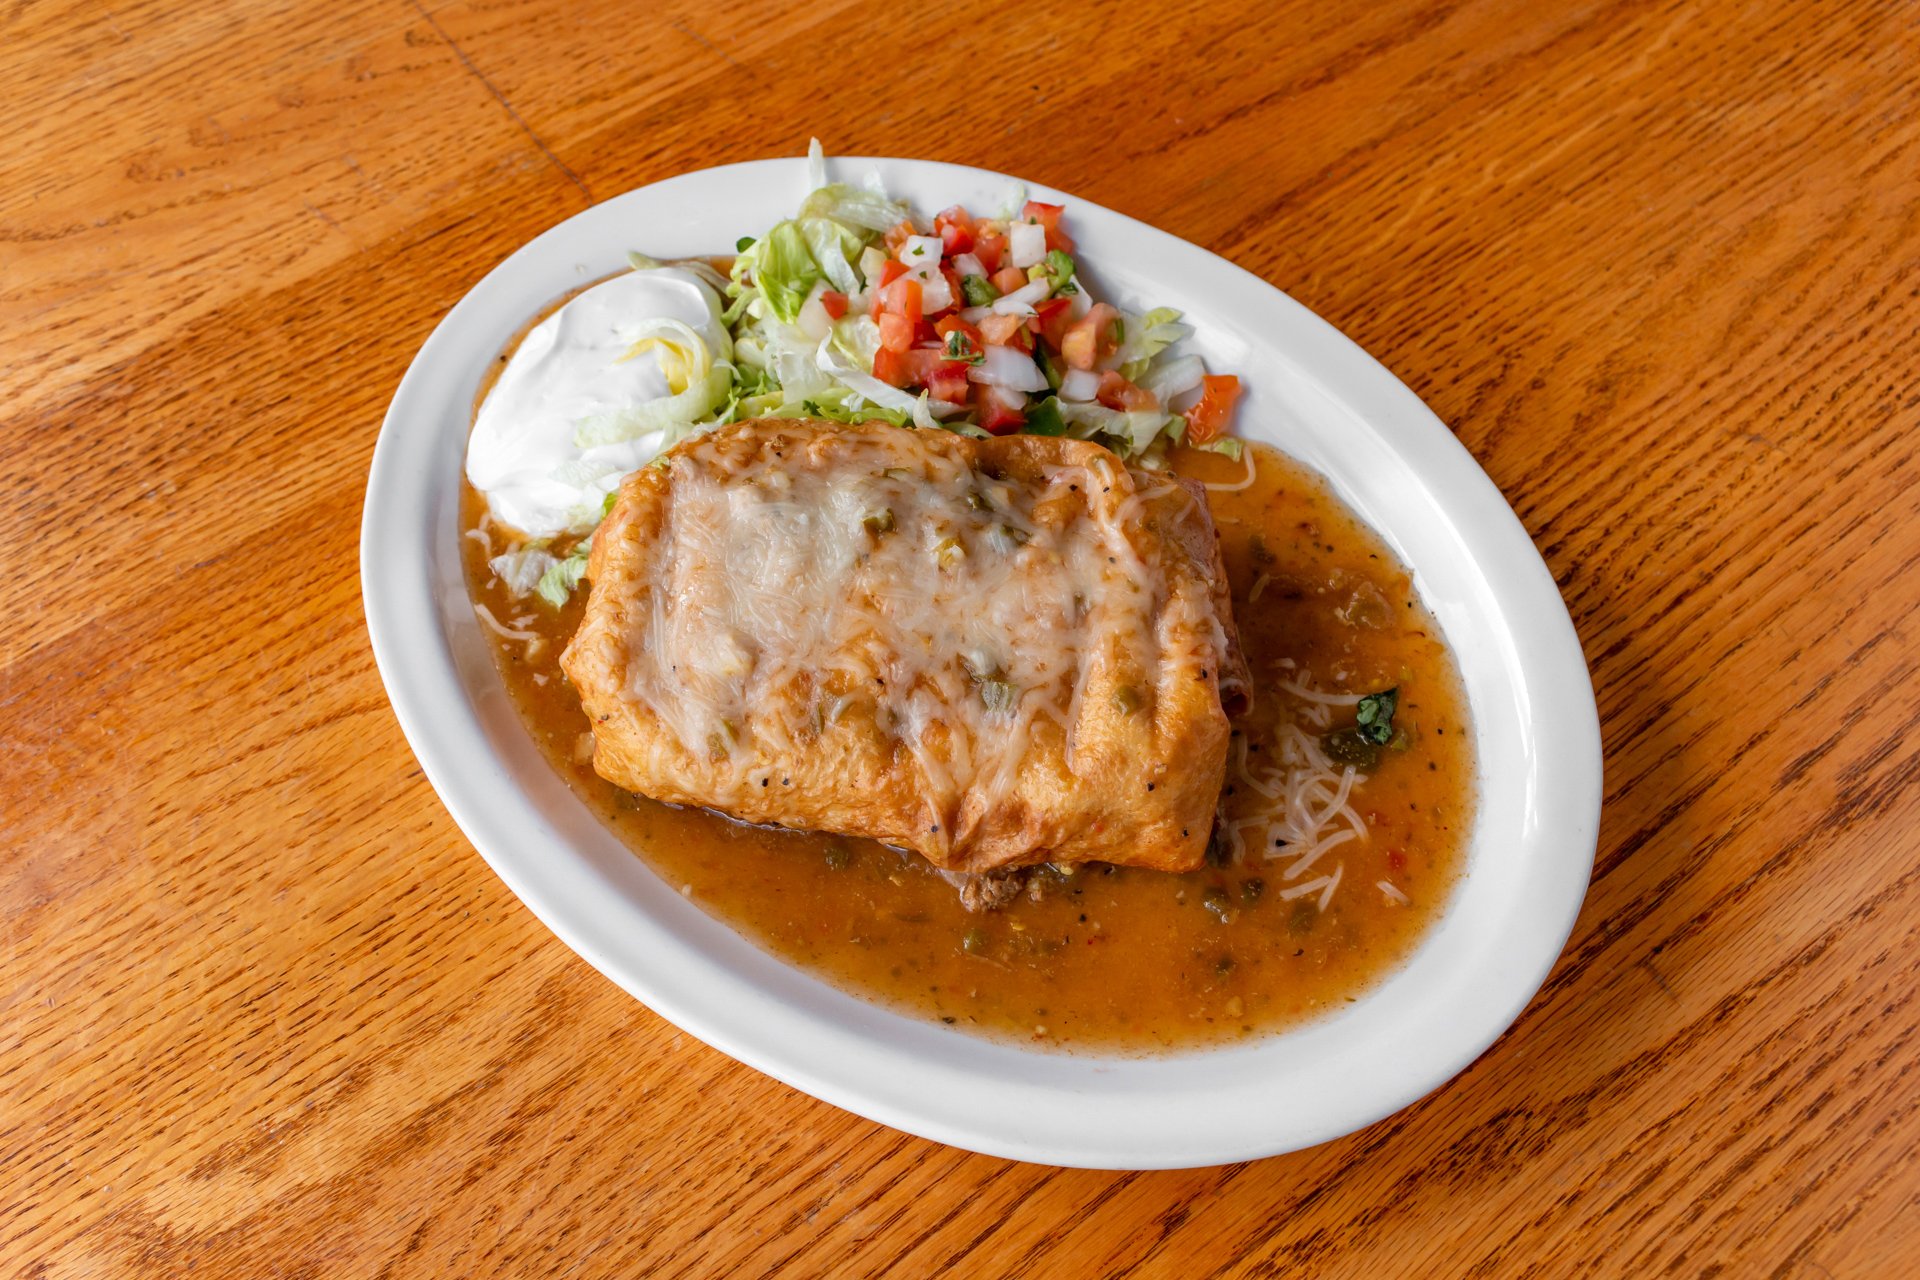 Rancho Fiesta - Todays featured menu item is the #33 Chimichangas